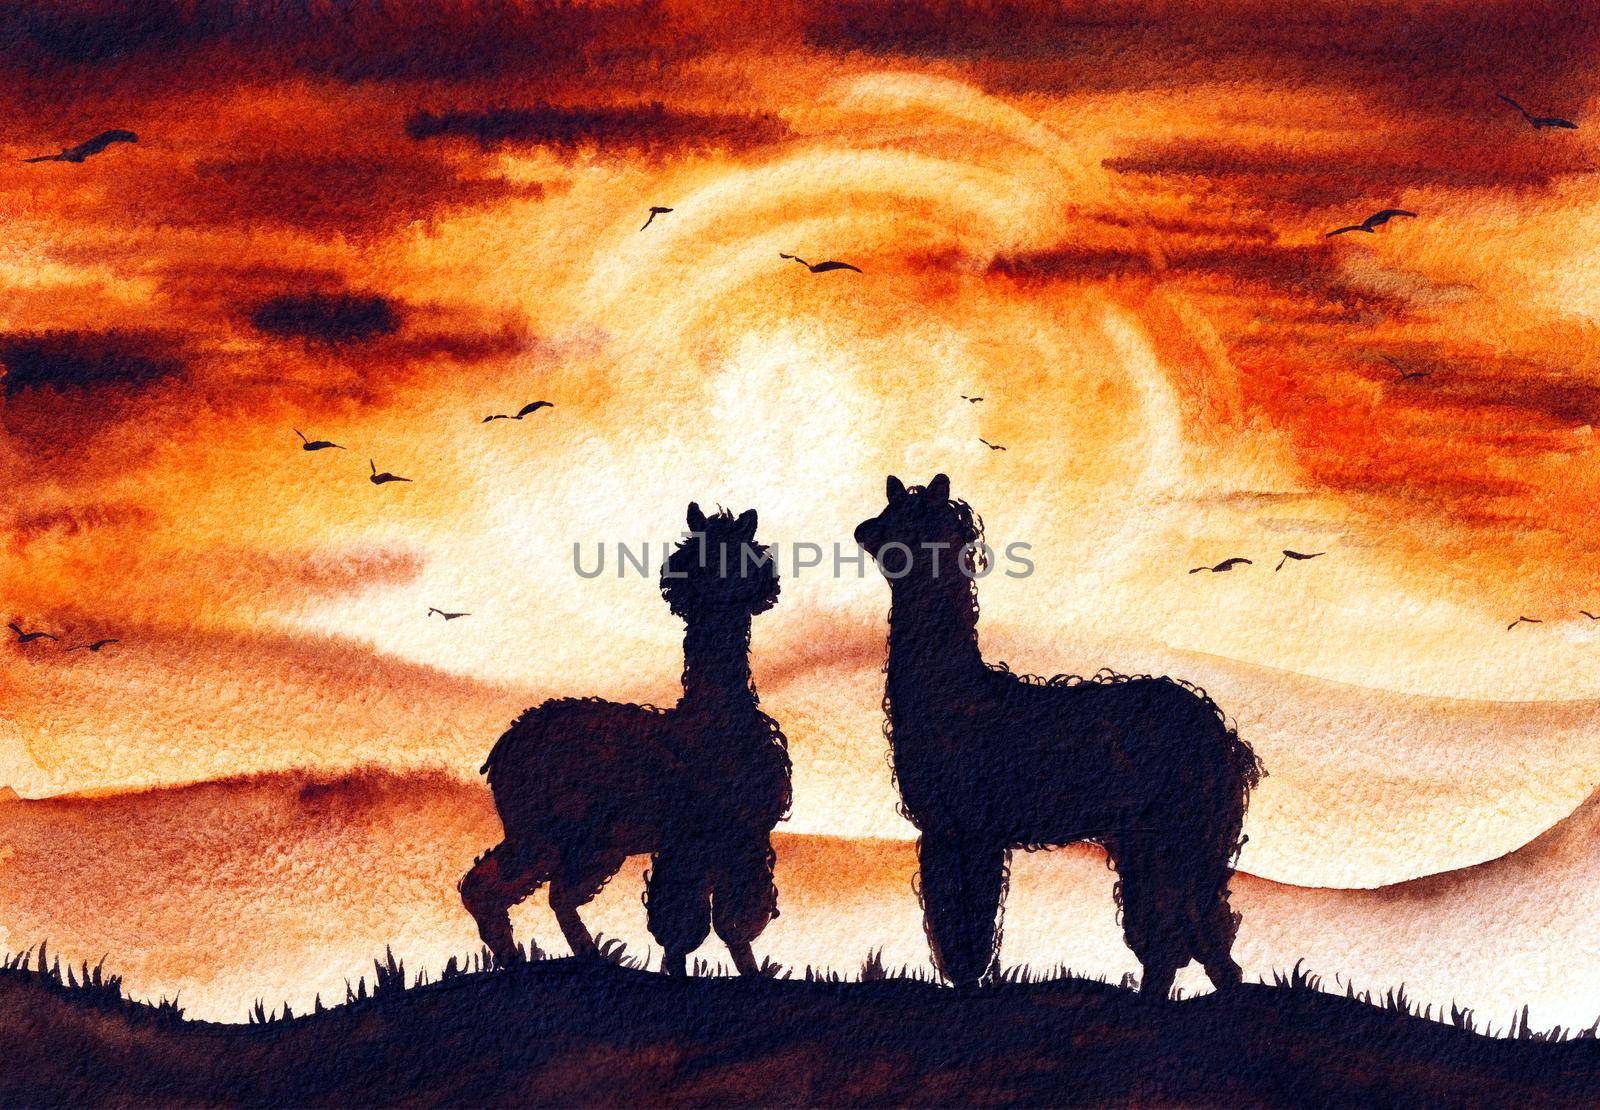 Llama Watercolor Illustration Original Art at the paper. Alpaca Poster Hand Painted in Watercolour Style. Can be used for Print Wallpaper and Background.